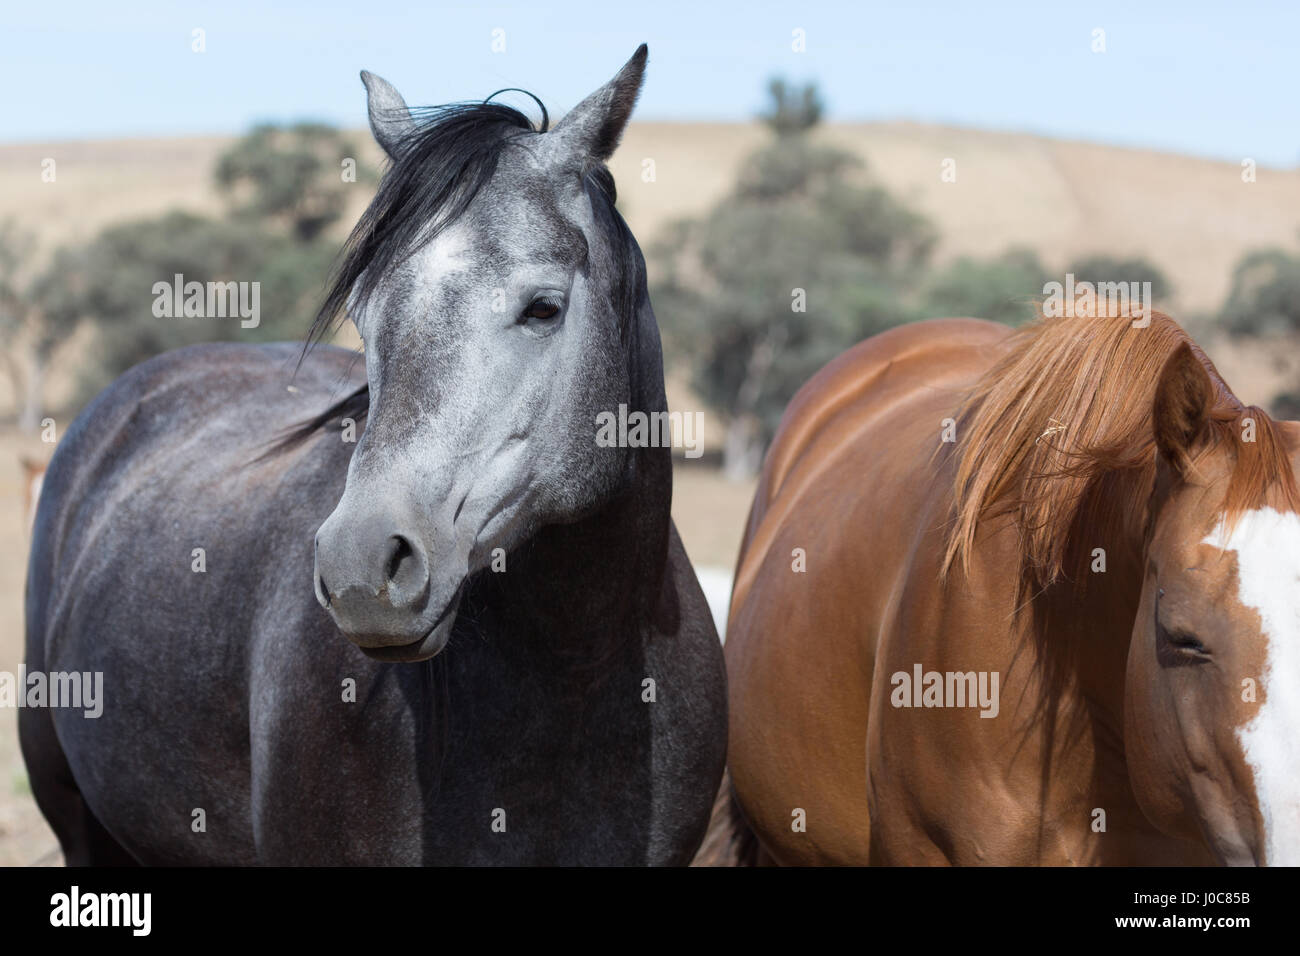 A photograph of a beautiful black and grey horse on farm in Central Western NSW, Australia. Stock Photo